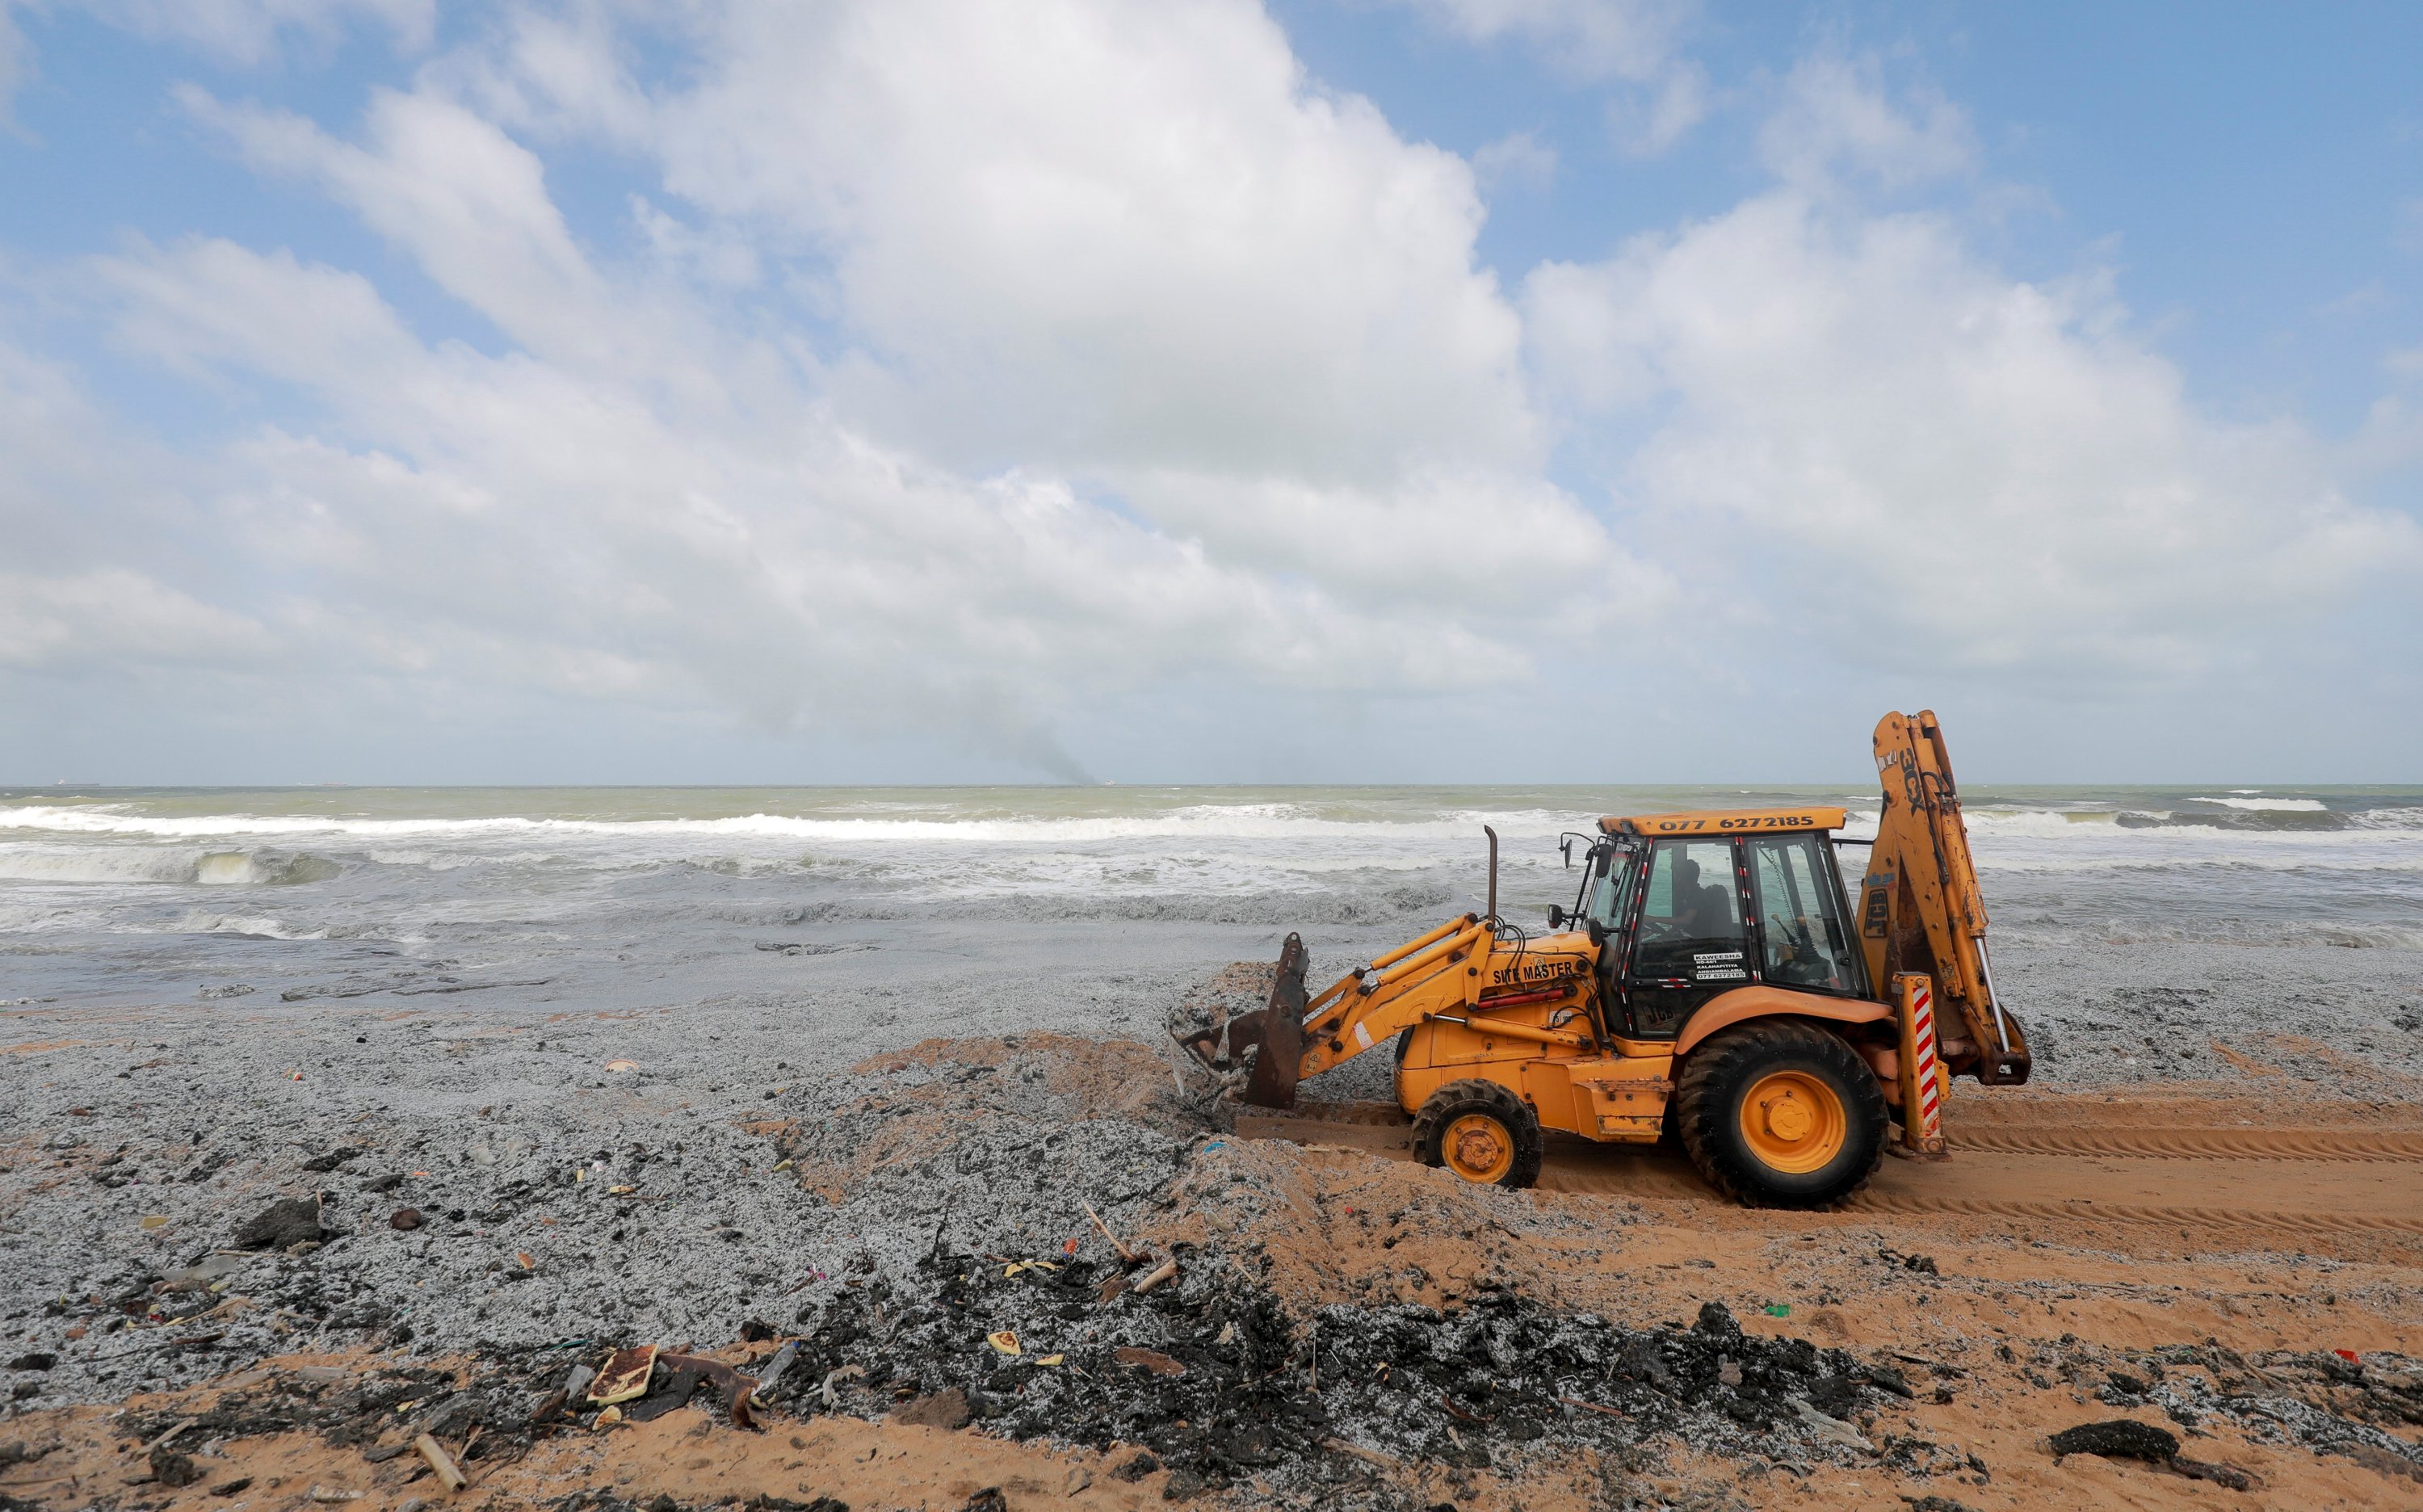 A backhoe loader collects debris washed onto a beach from the MV X-Press Pearl container ship, which caught fire off the Colombo Harbor, on a beach in Ja-Ela, Sri Lanka, May 28, 2021. (Reuters Photo)